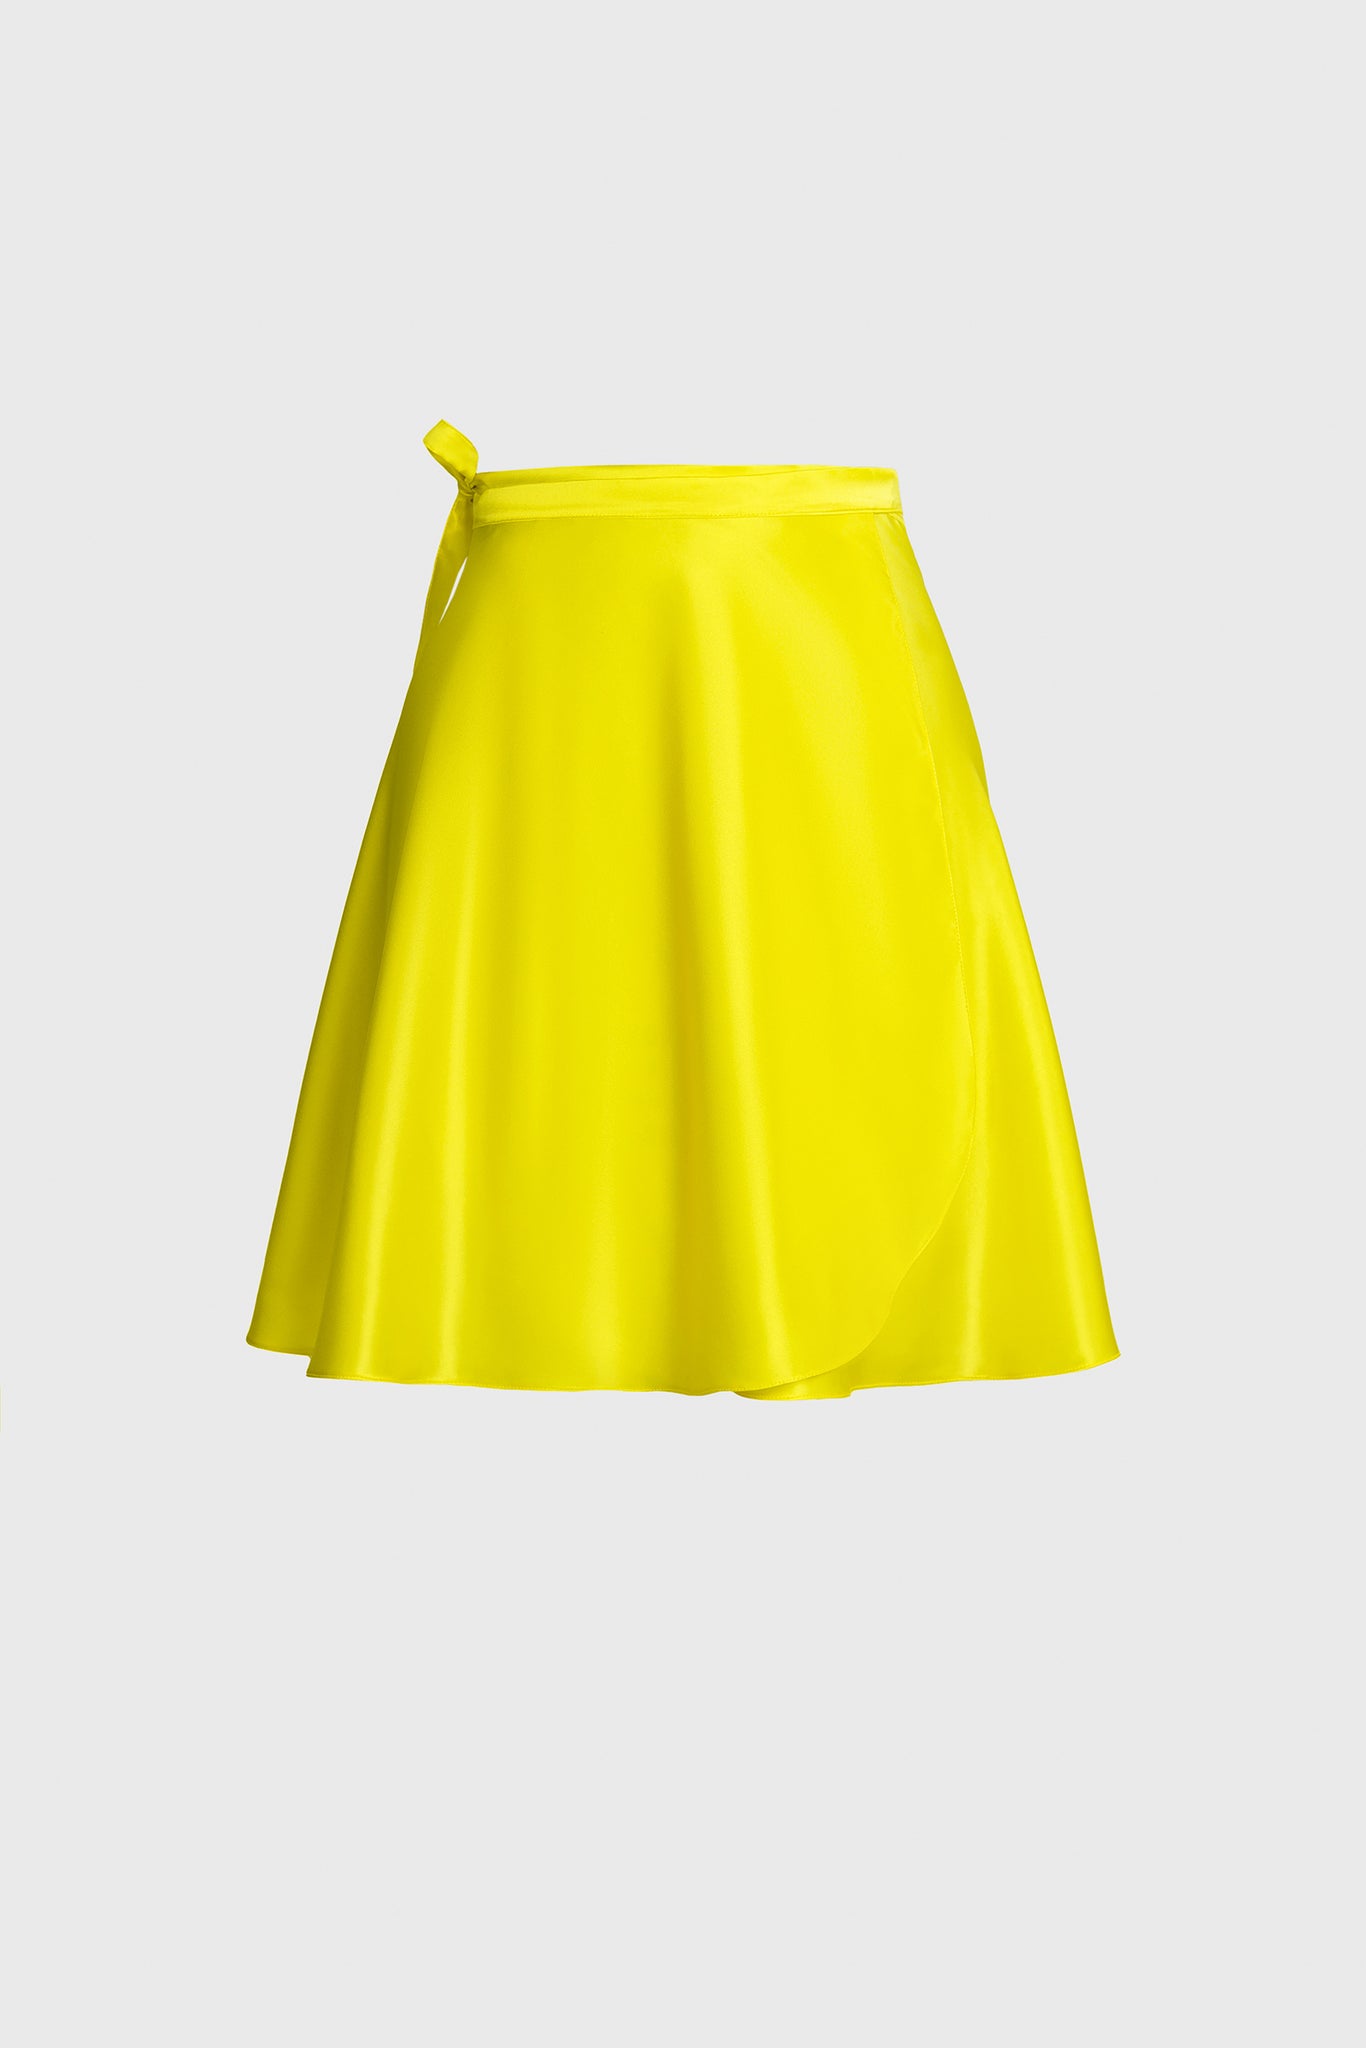 Ruxandra designed ballerina bias cut silk skirt, above the knee mini skirt, wrap around your waist, French seam finish, round edges, easy to fit bigger sizes, all kind of women's shapes, perfect style for a club outfit, moves with the body, young and elegant